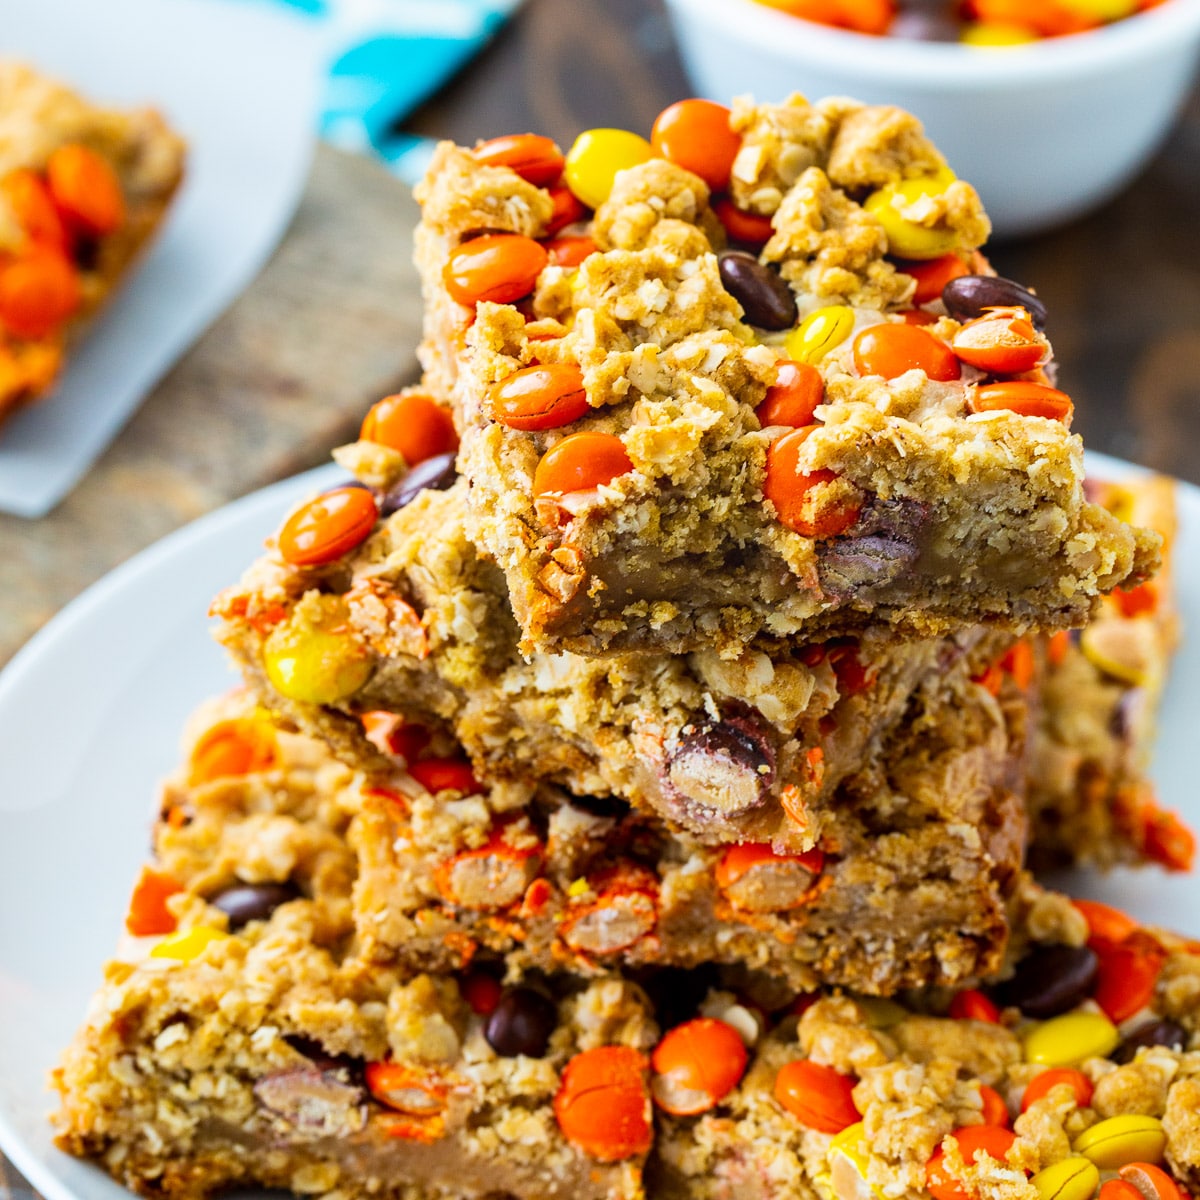 Reese's Pieces Oatmeal Bars stacked on a plate.